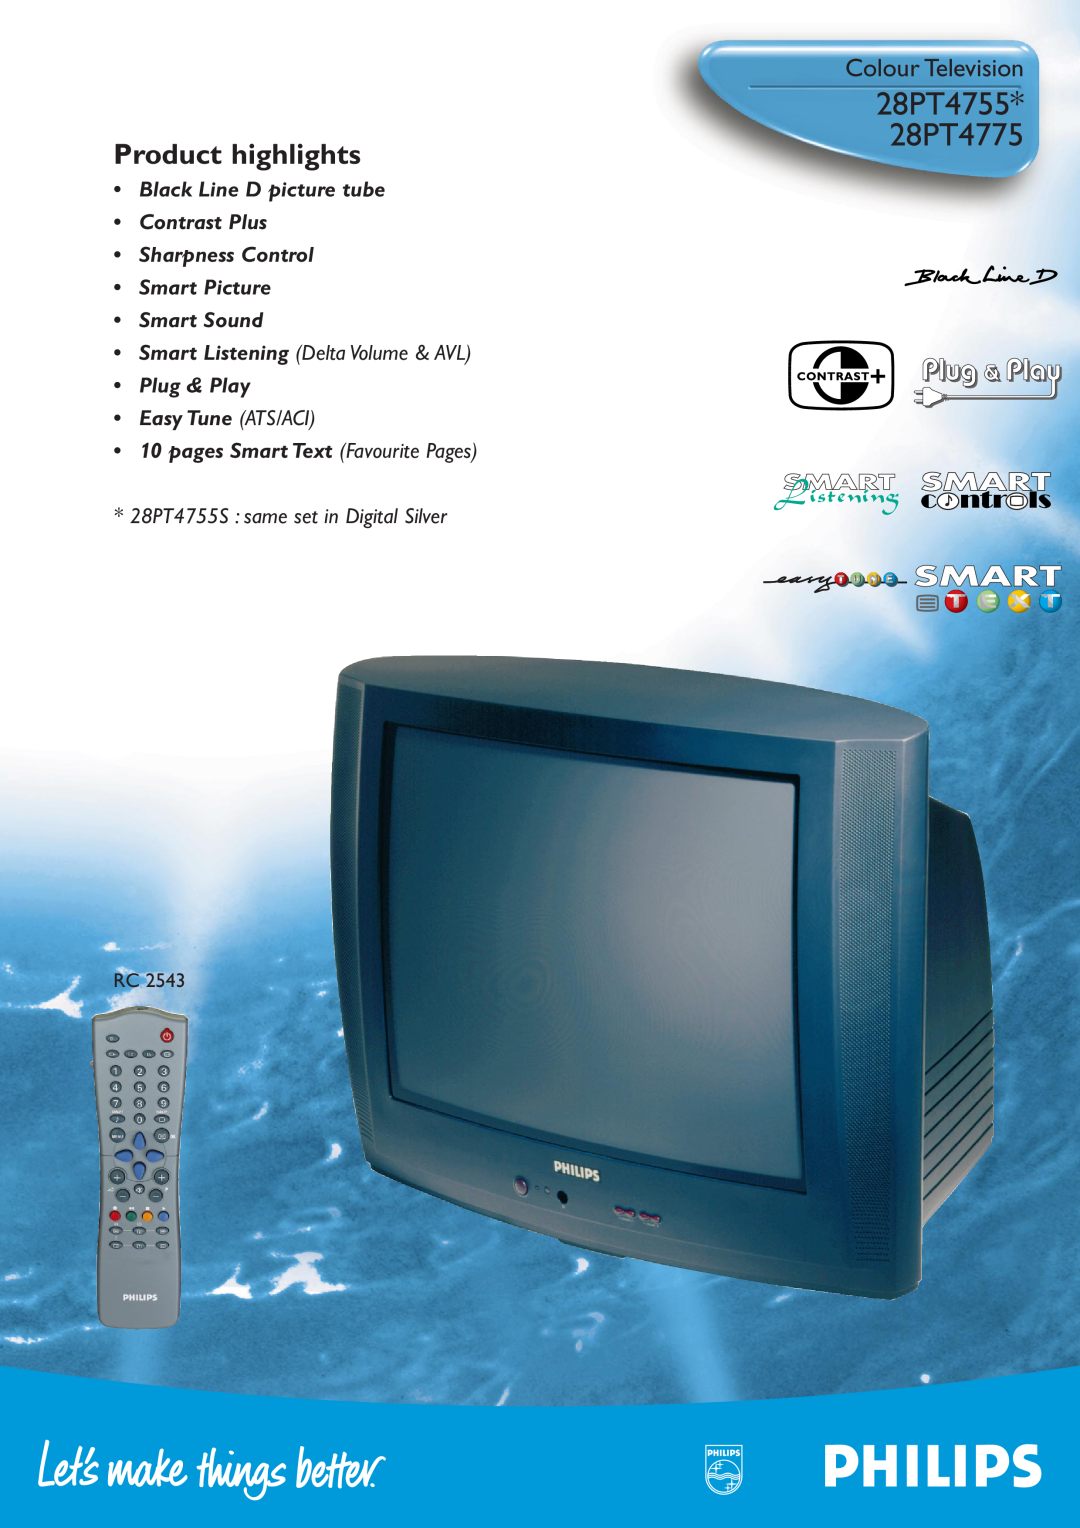 Philips 28PT4755* manual 28PT4775, Colour Television, Product highlights, Smart Picture Smart Sound 